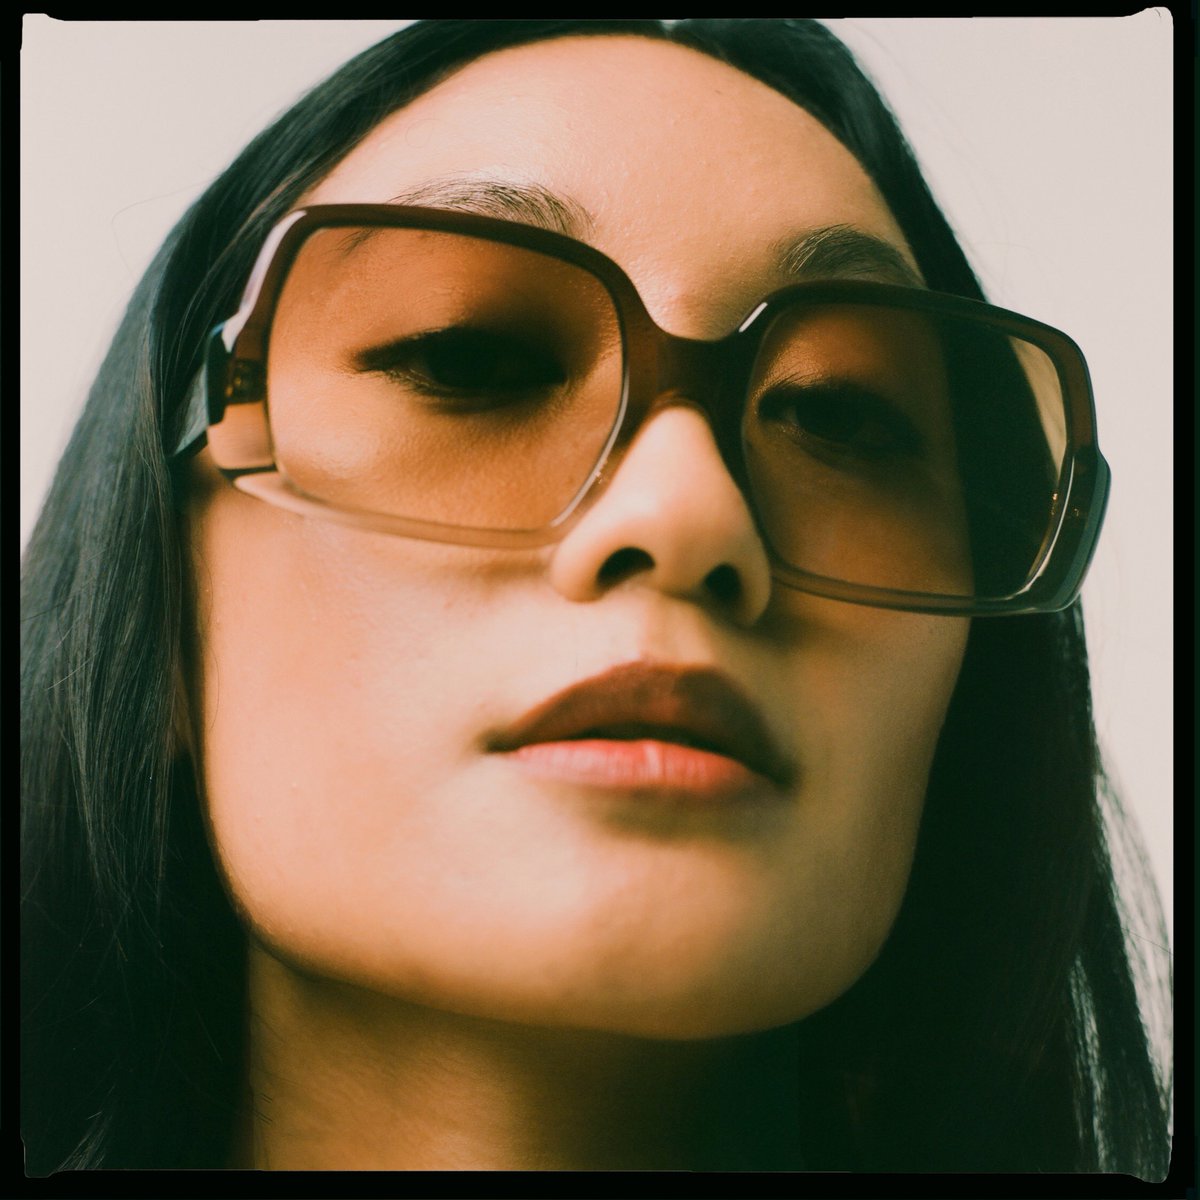 Introducing the Davenport. The '70s oversize frame you always wanted with a modern glamour. 16mm camera and French accent sold separately. #SeeWithLove | thisisdl.com